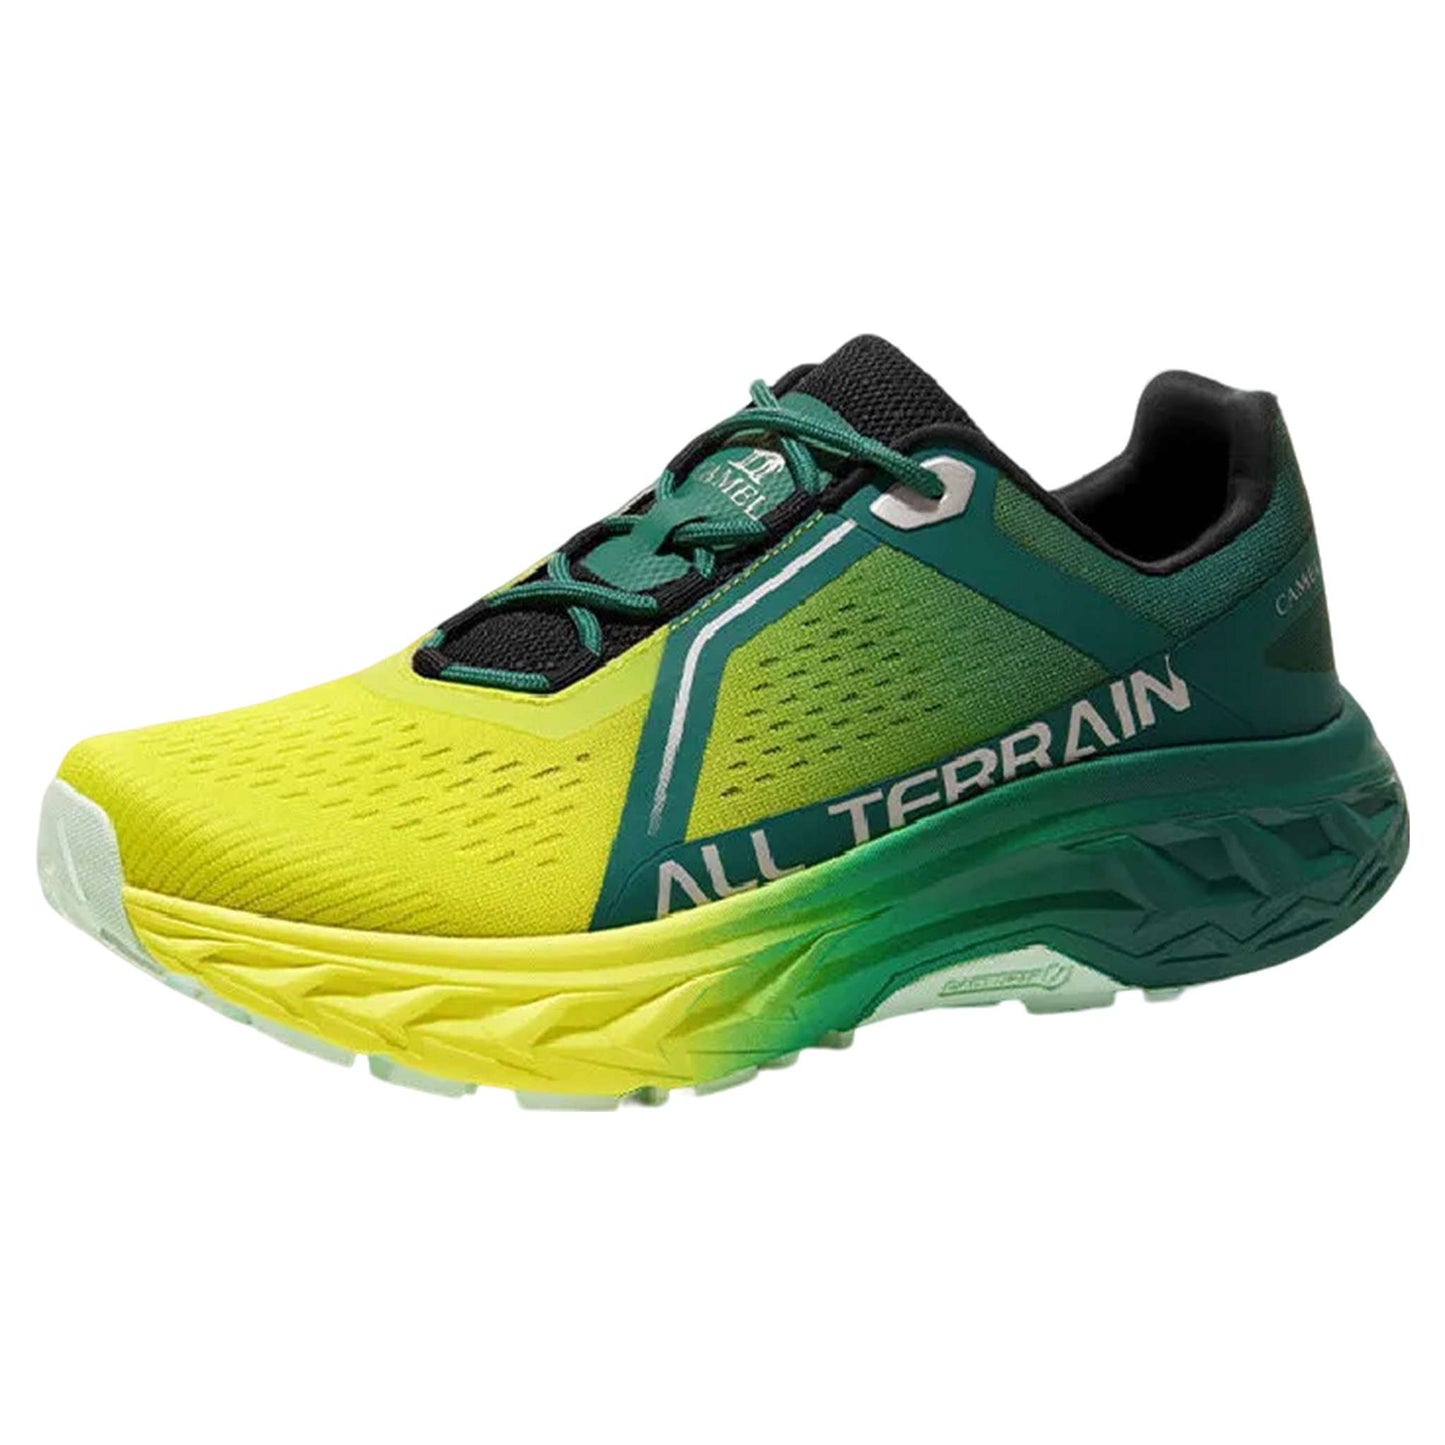 Men's Cushioned Trail Running Shoes - Non-Slip, Breathable Sneakers for Cross-Country & Athletic Activities